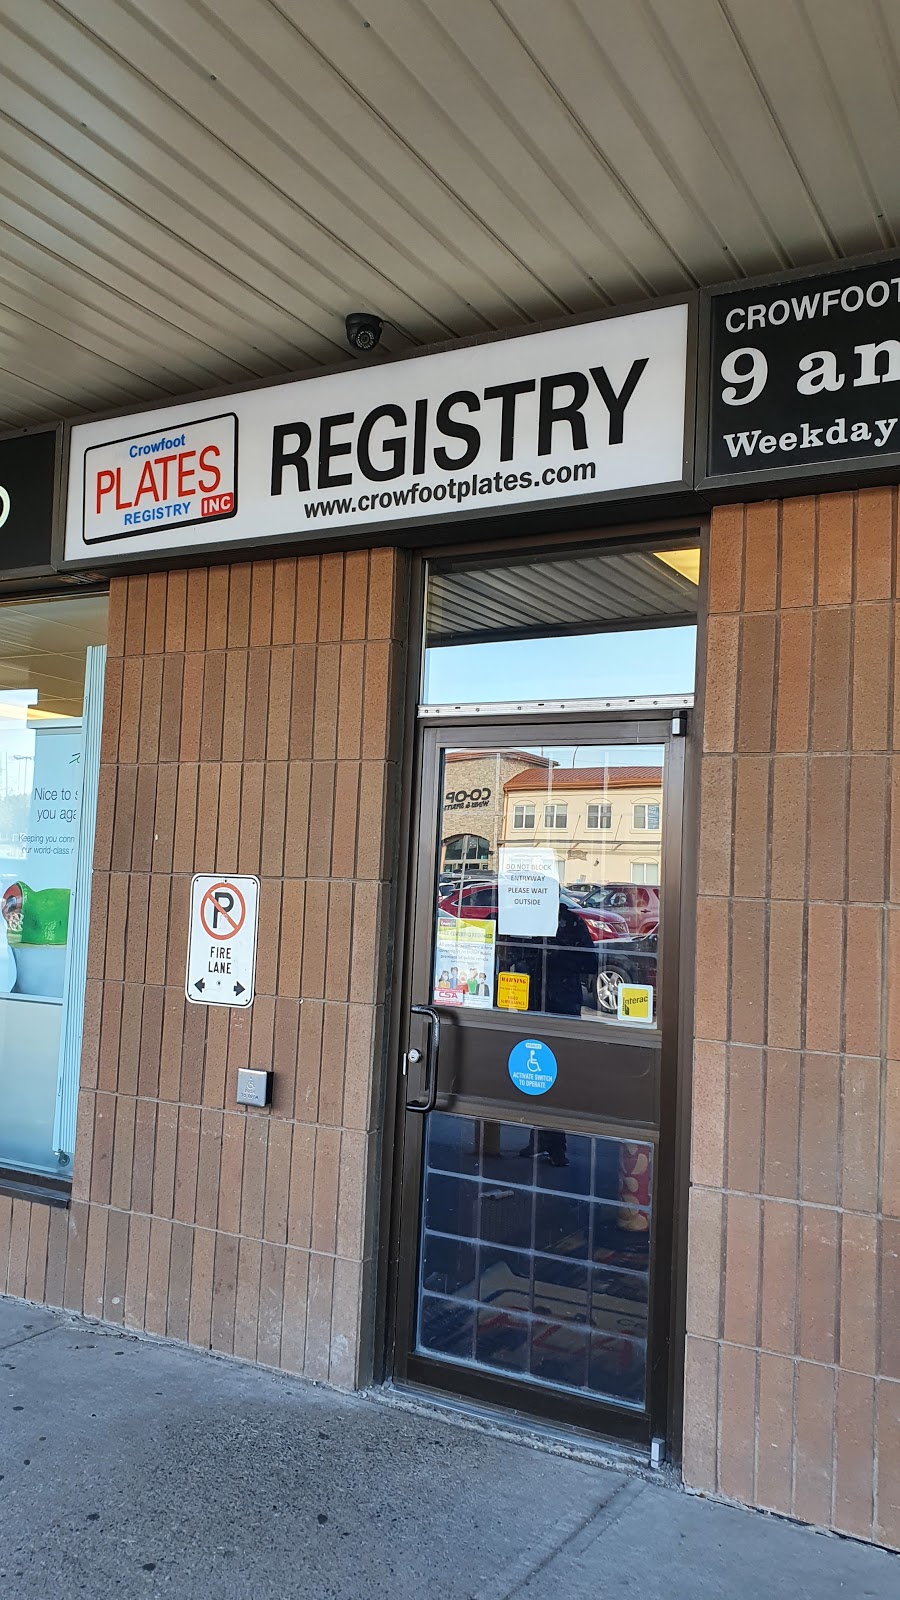 Crowfoot Plates Registry Inc | point of interest | 49 Crowfoot Way NW, Calgary, AB T3G 2L4, Canada | 4032417951 OR +1 403-241-7951